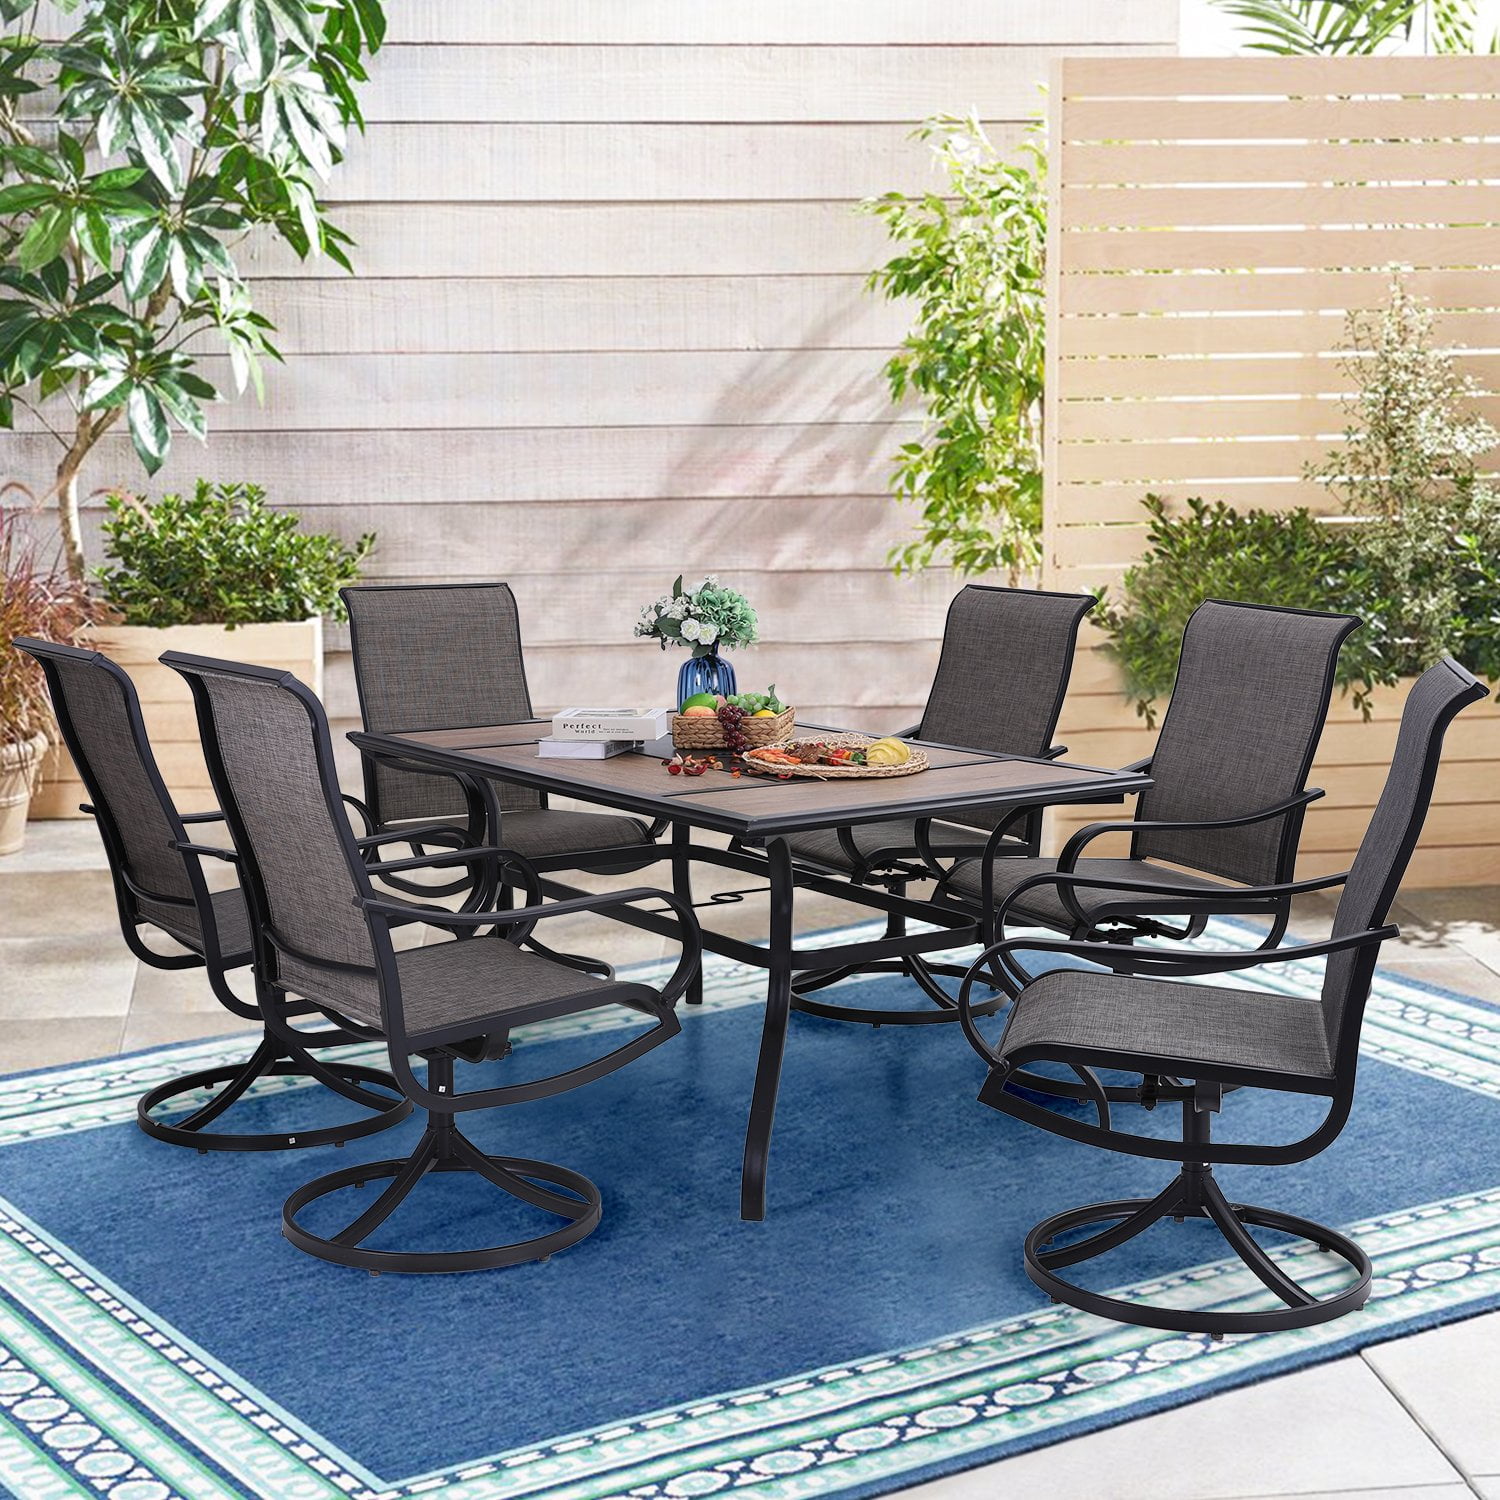 Backyard 6 Metal Dining Swivel Padded Chairs and Steel Frame Slat Larger Rectangular Table with 1.57 Umbrella Hole for Poolside MFSTUDIO 7-Piece Outdoor Patio Dining Set Porch 